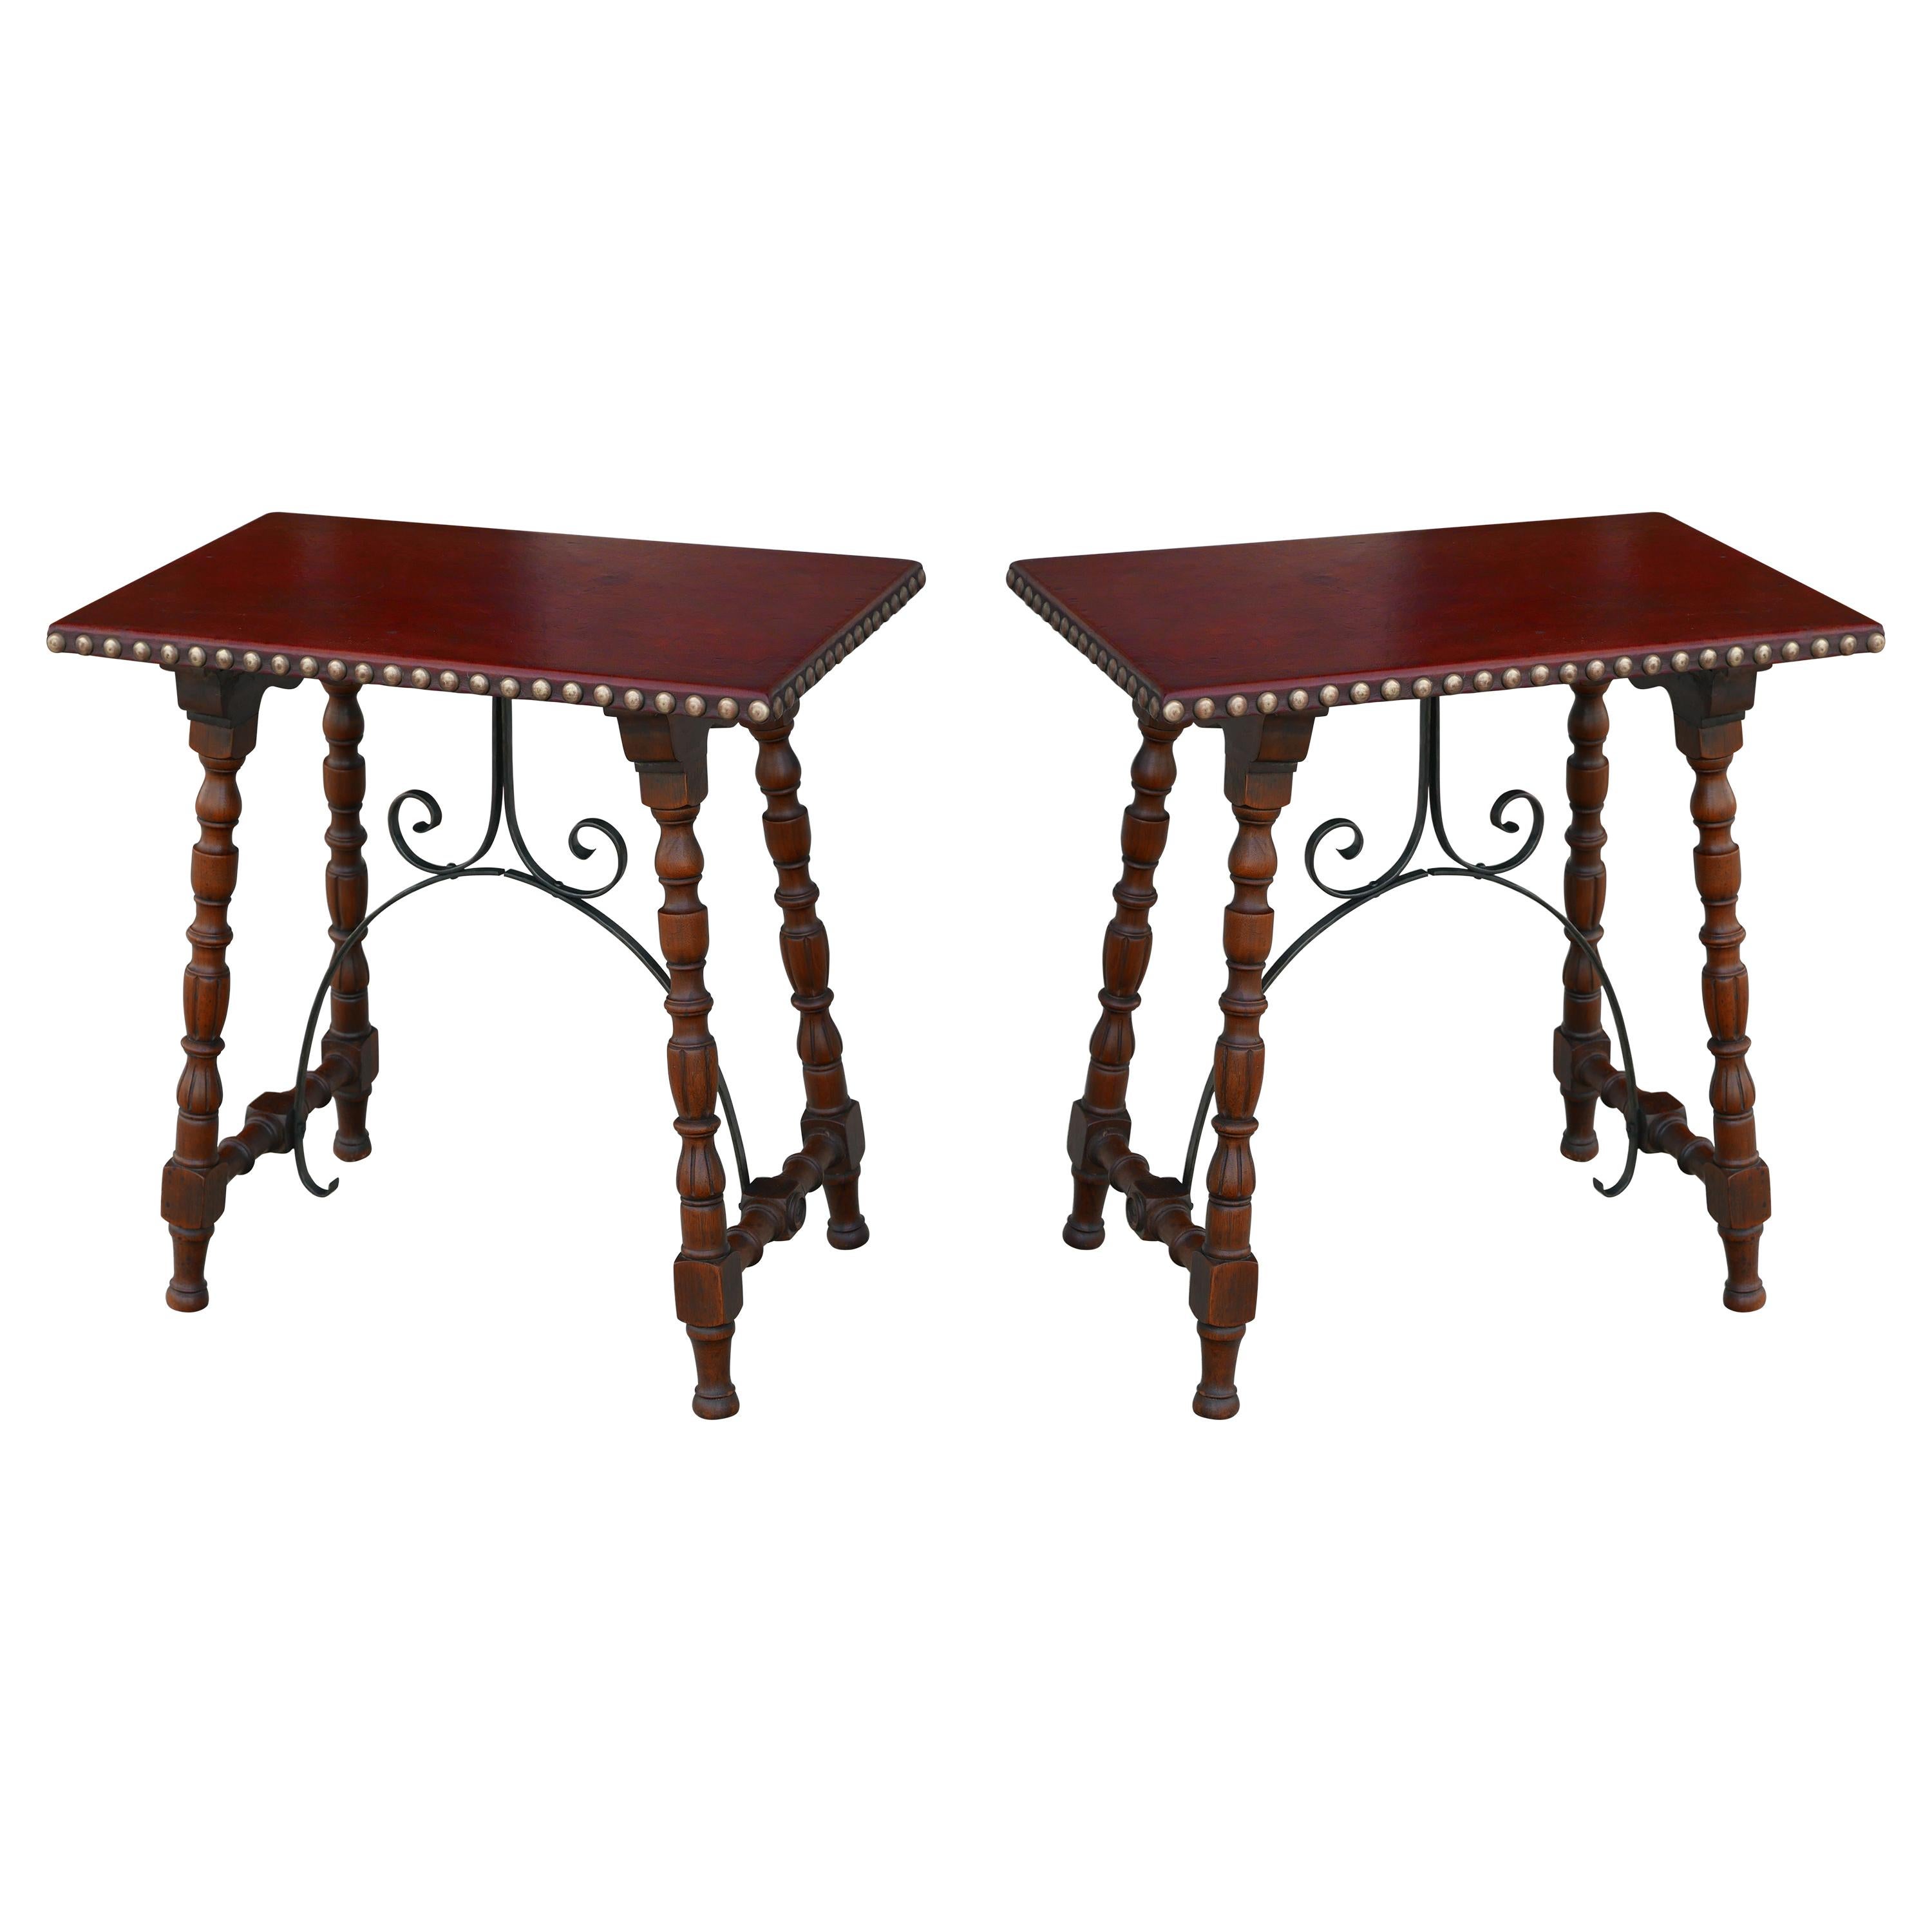 Early Pair of Leather Top Kittinger Spanish Revival Tables